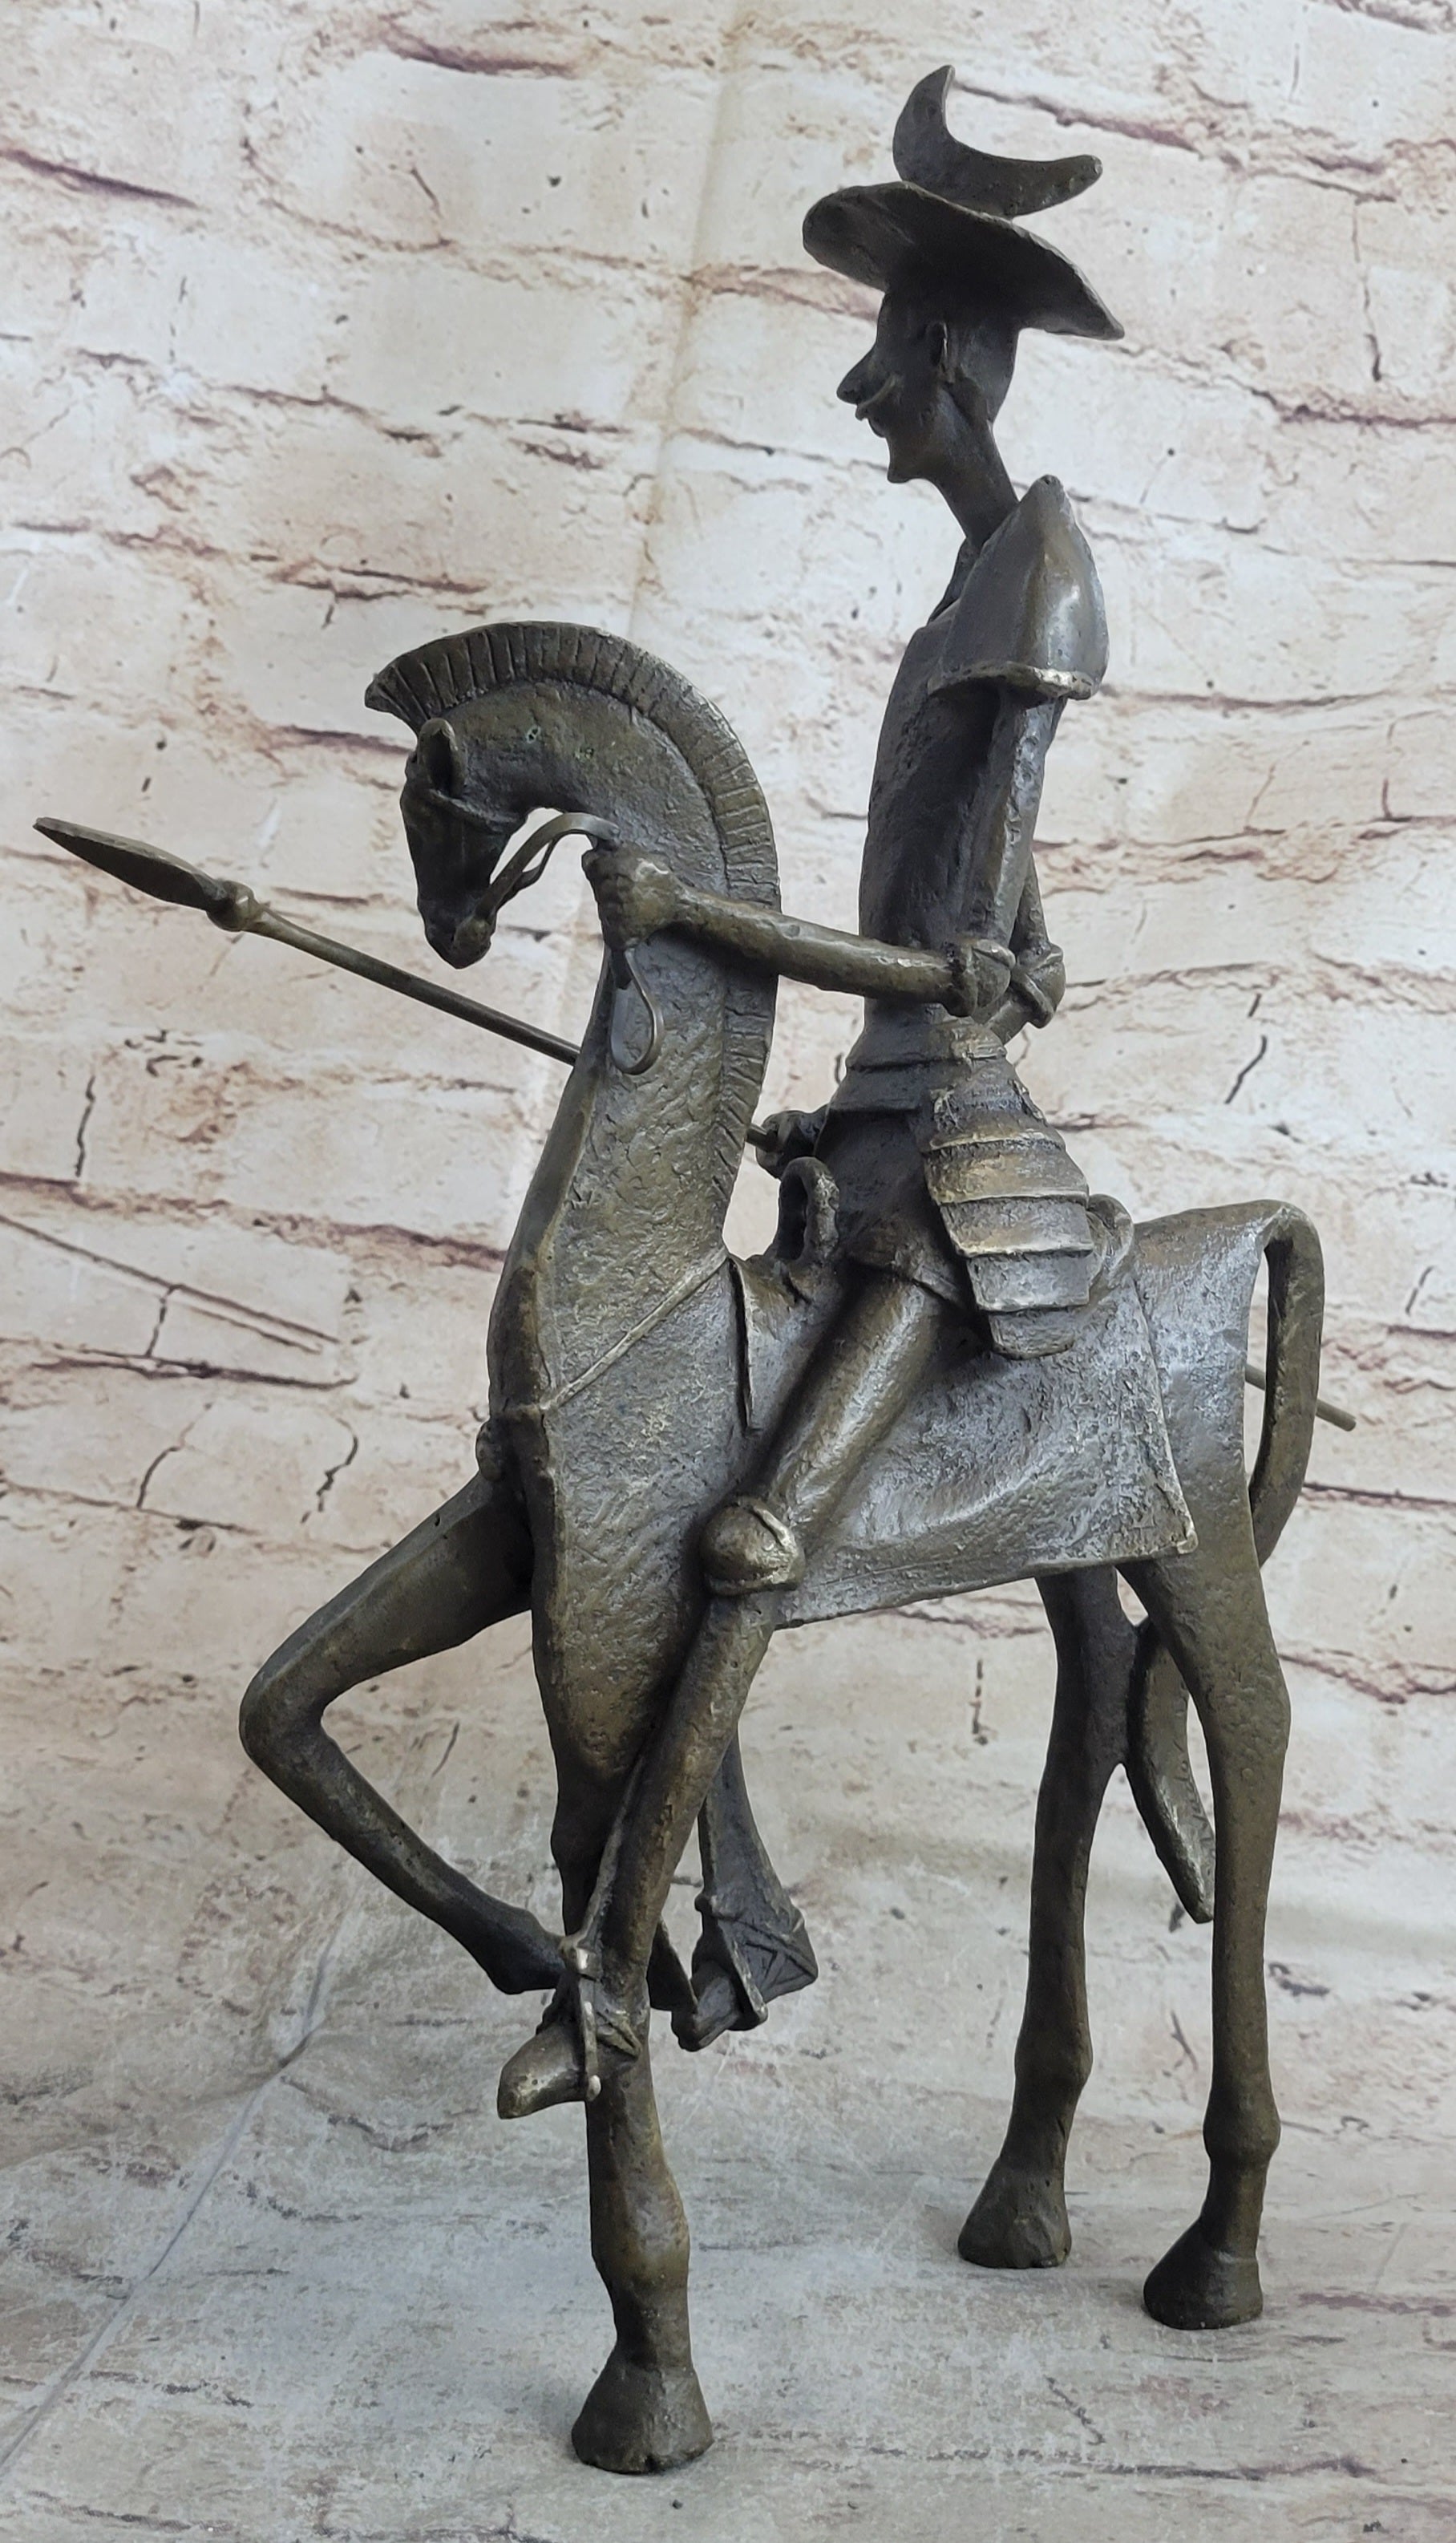 Handcrafted bronze sculpture SALE Mythical Horse On Quixote" "Don Dali Salvador